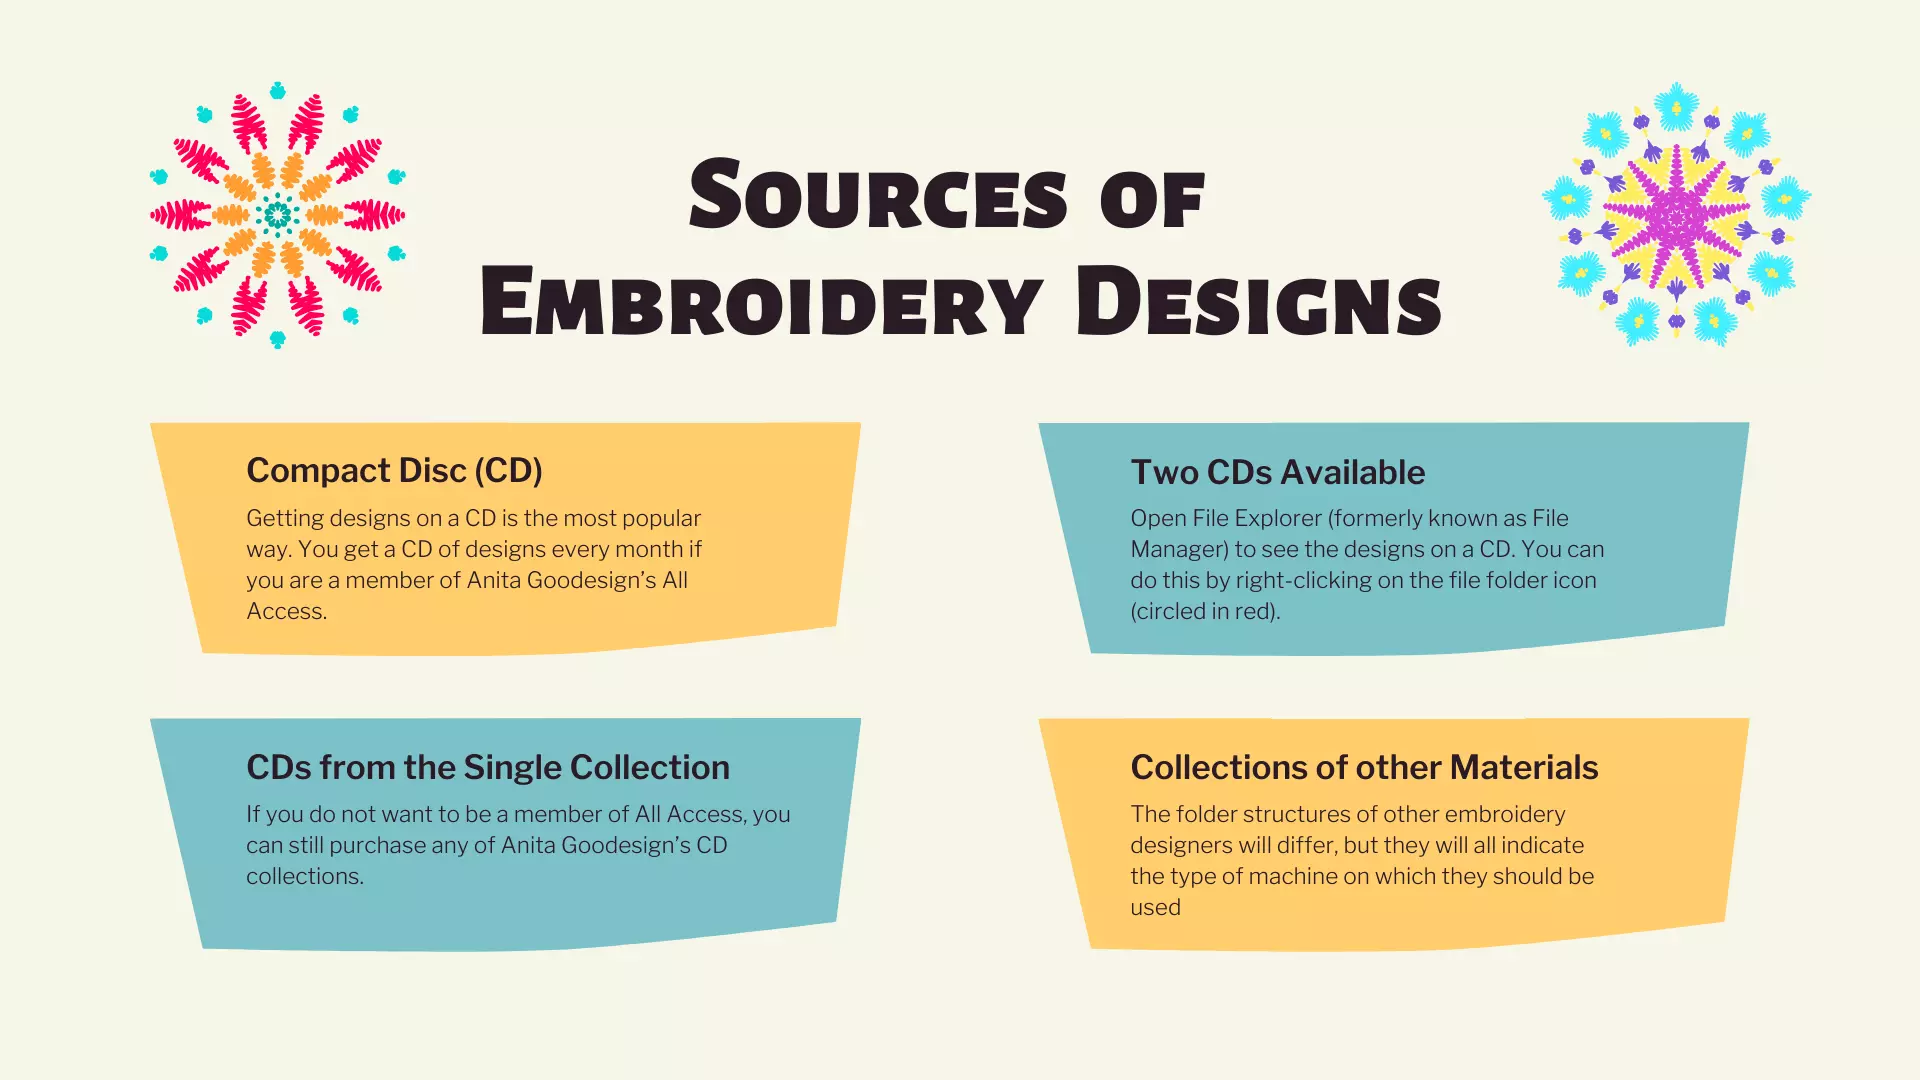 Sources of Embroidery Designs